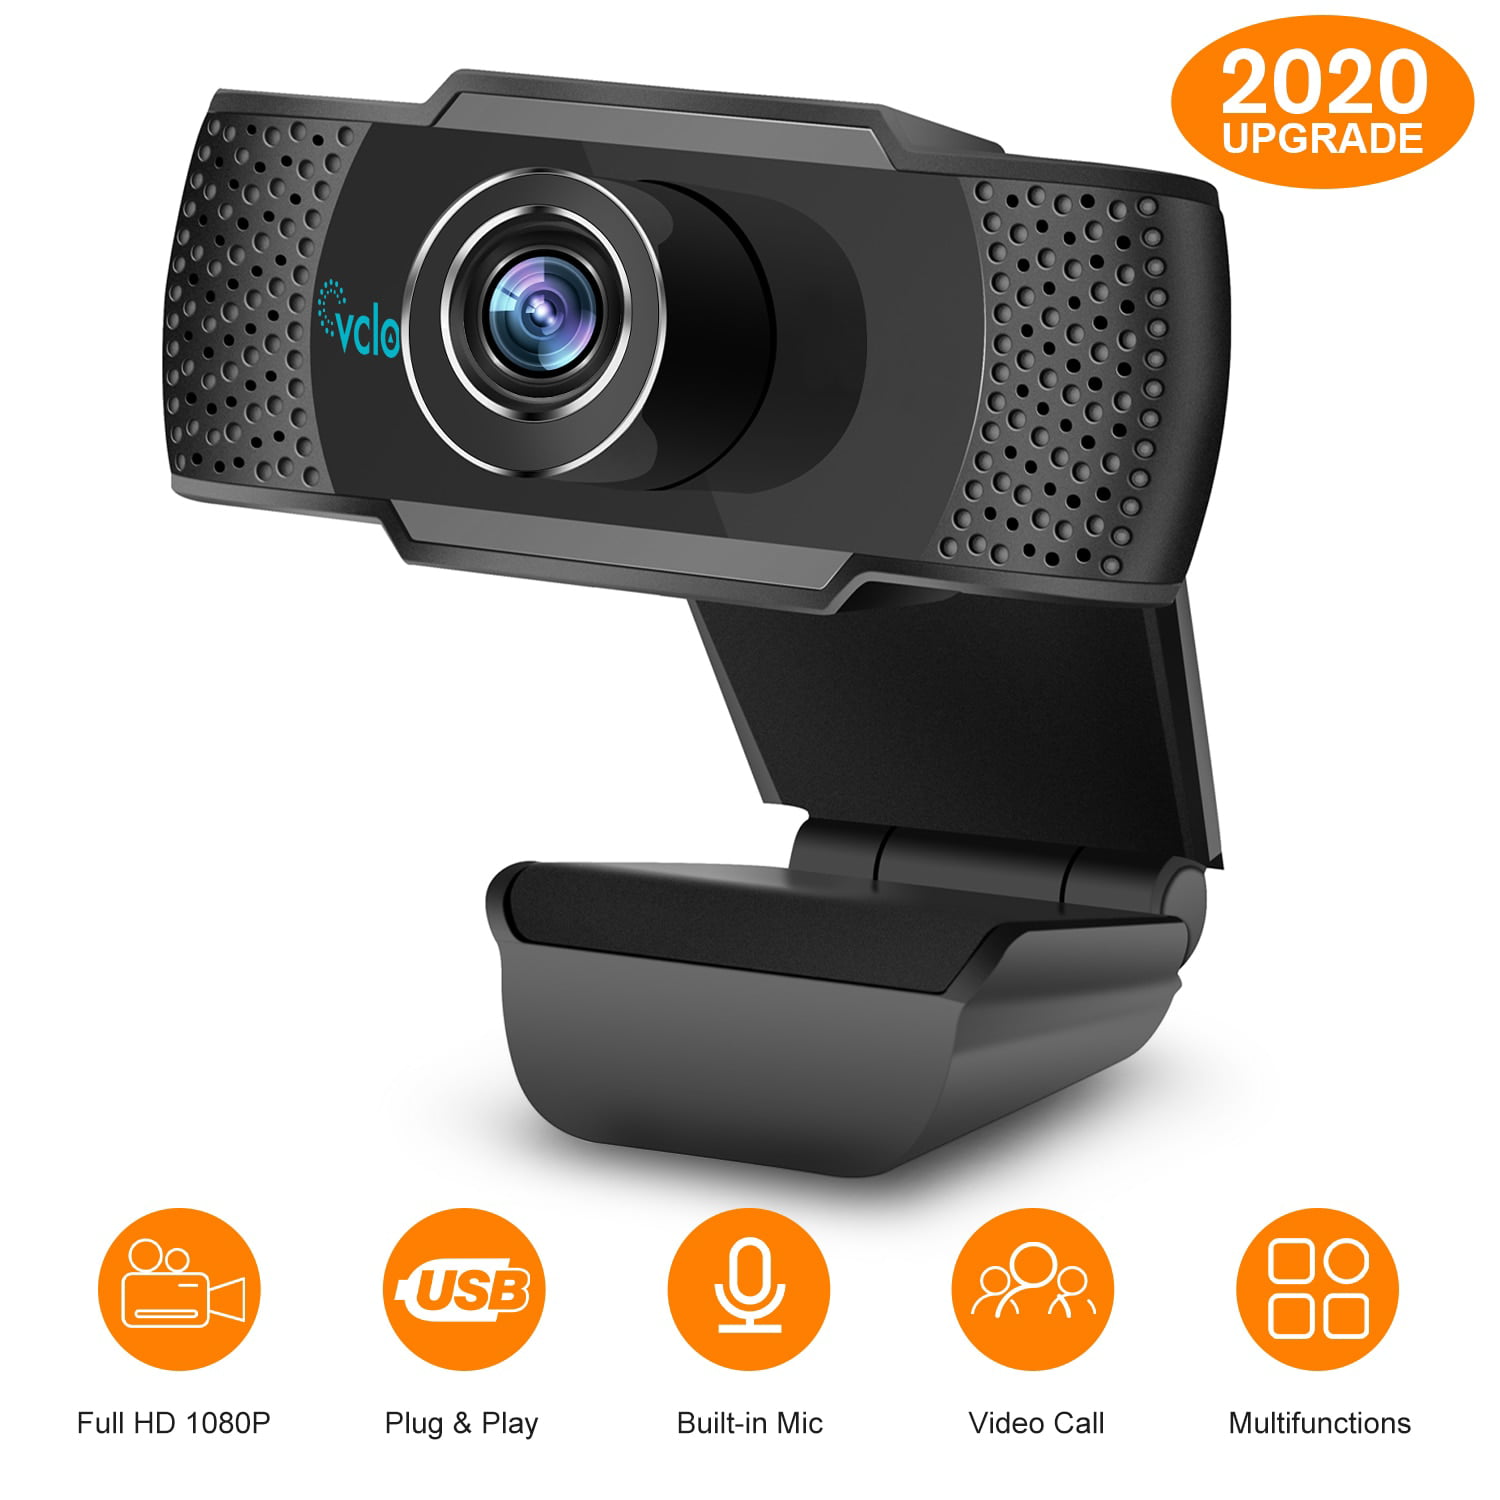 Webcam HD Webcam 1080P with Privacy Shutter and Tripod Stand Pro Streaming Web Camera with Microphone Widescreen USB Computer Camera for PC Mac Laptop Desktop Video Calling Conferencing Recording 